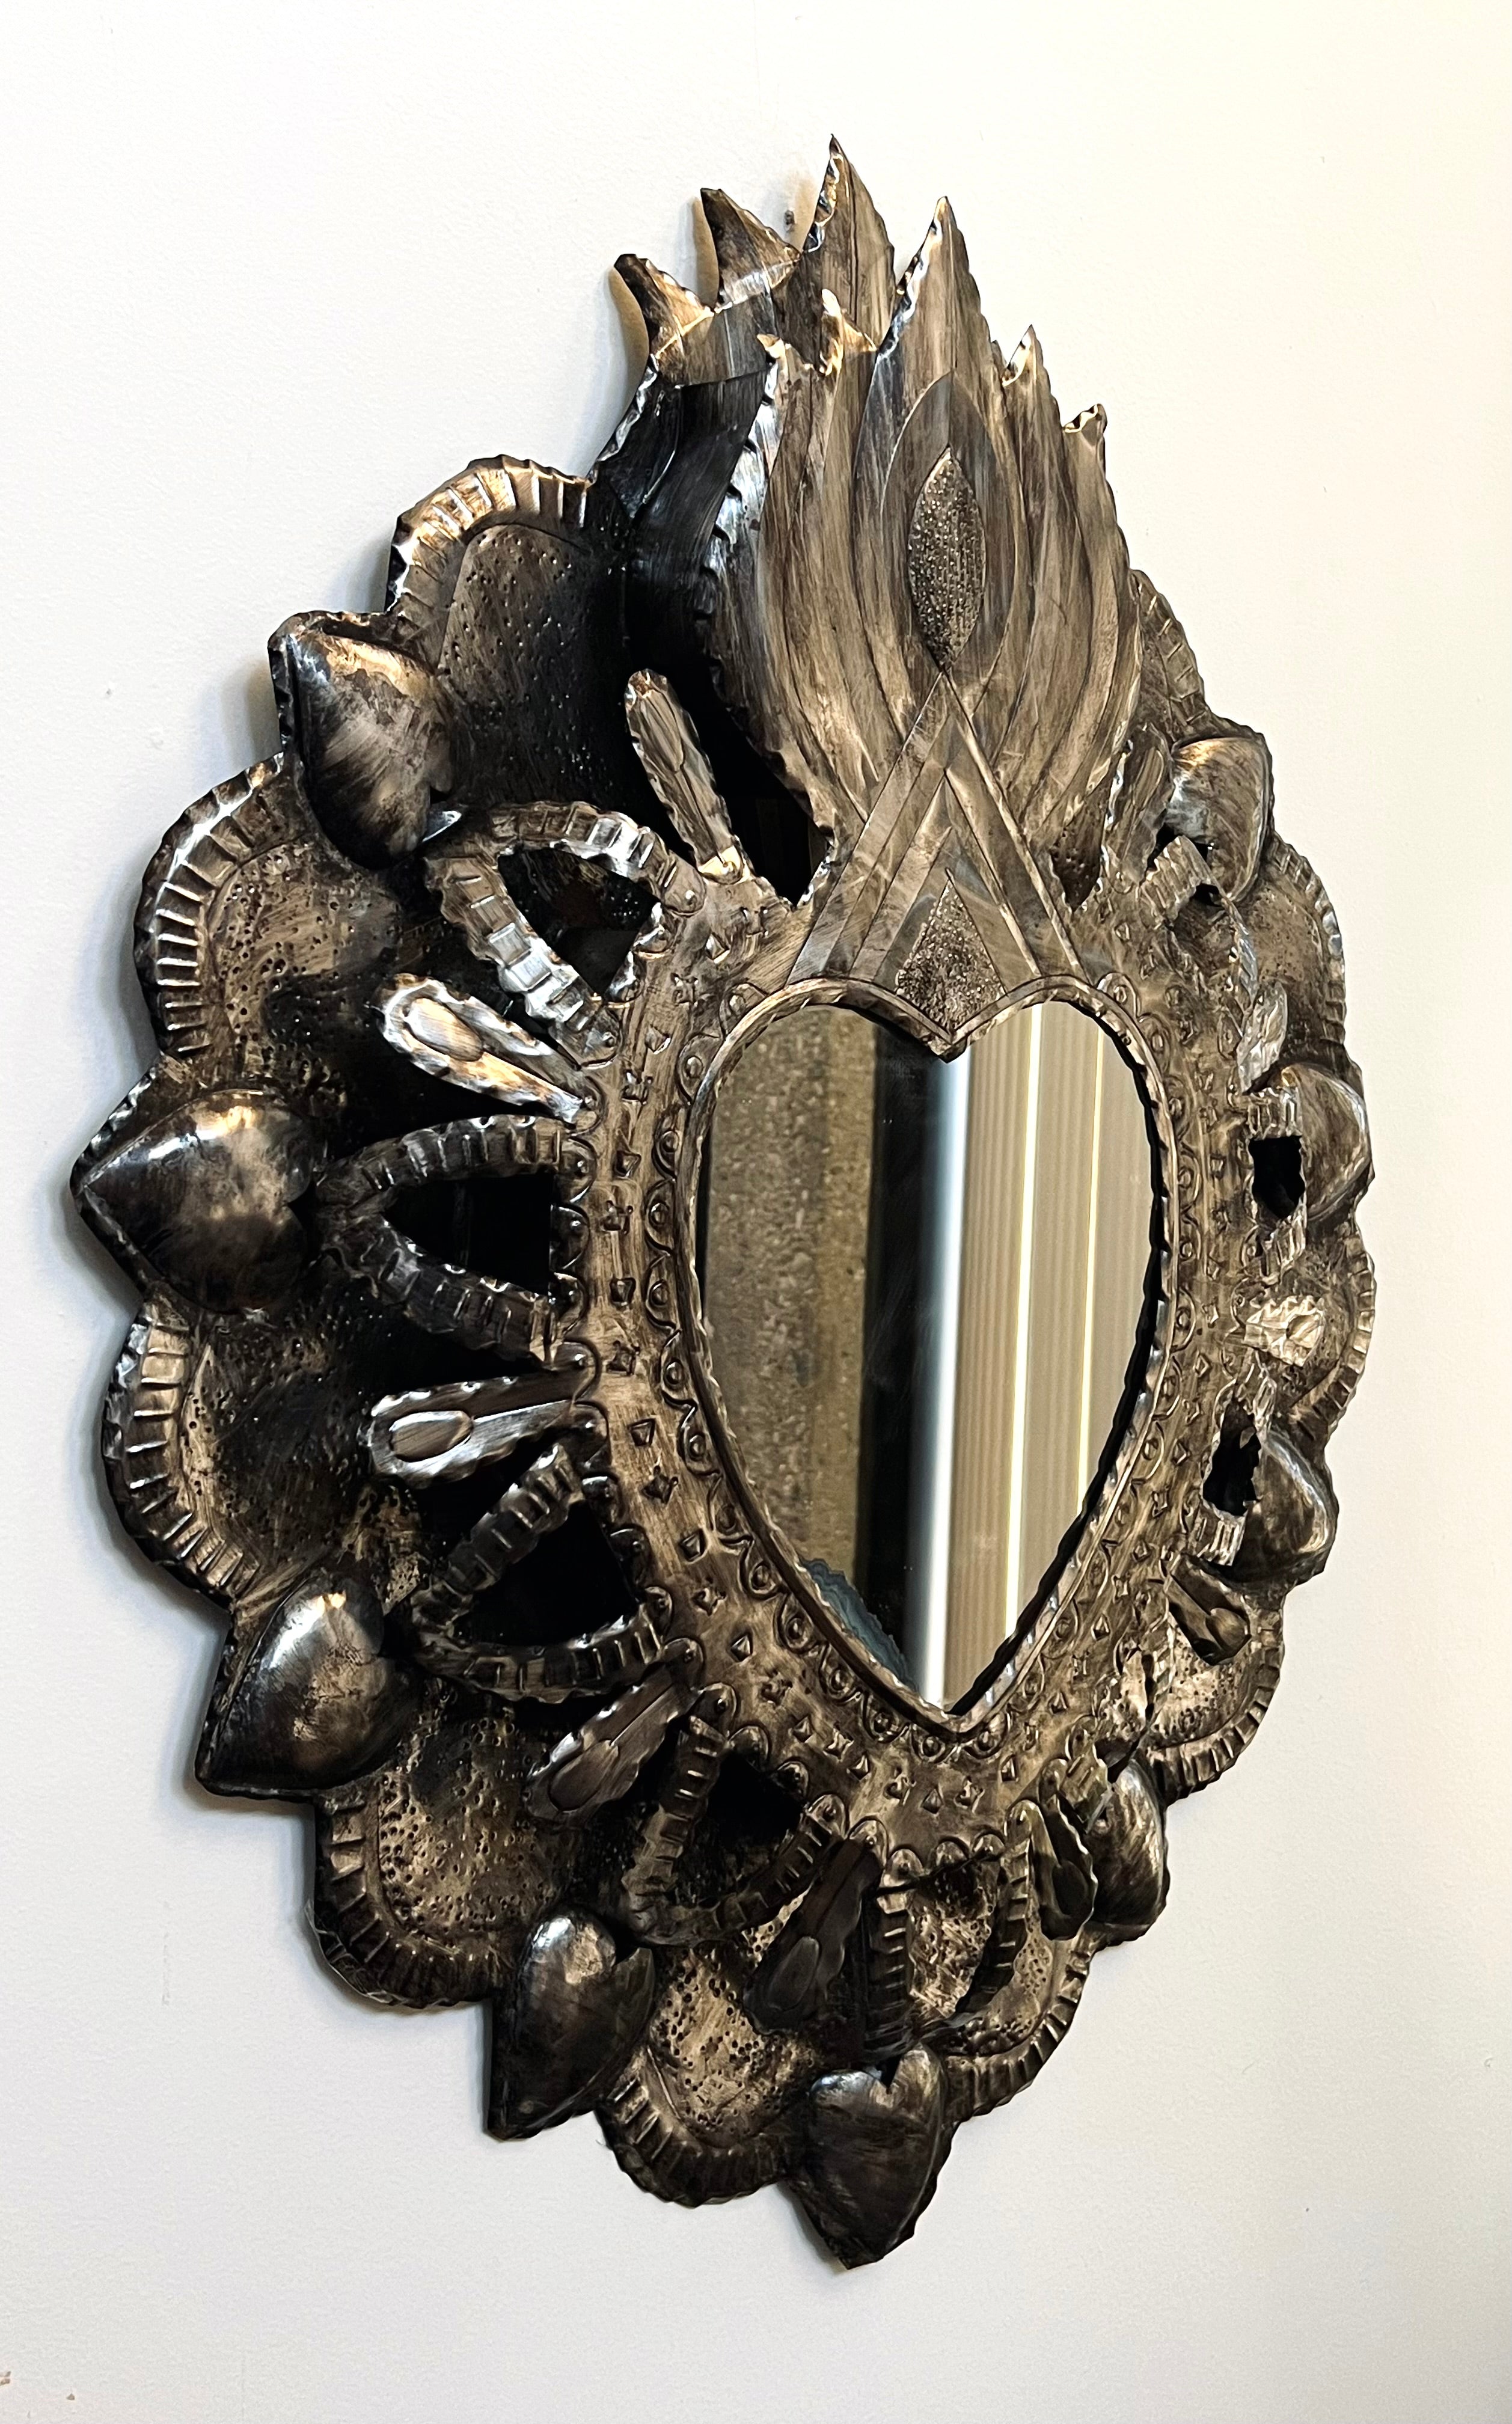 Vintage 1970s Mid-Century Modern Made in Mexico Wall Hanging Mirror Clad Art Silver Tin Metal (Vintage) (SOLD)